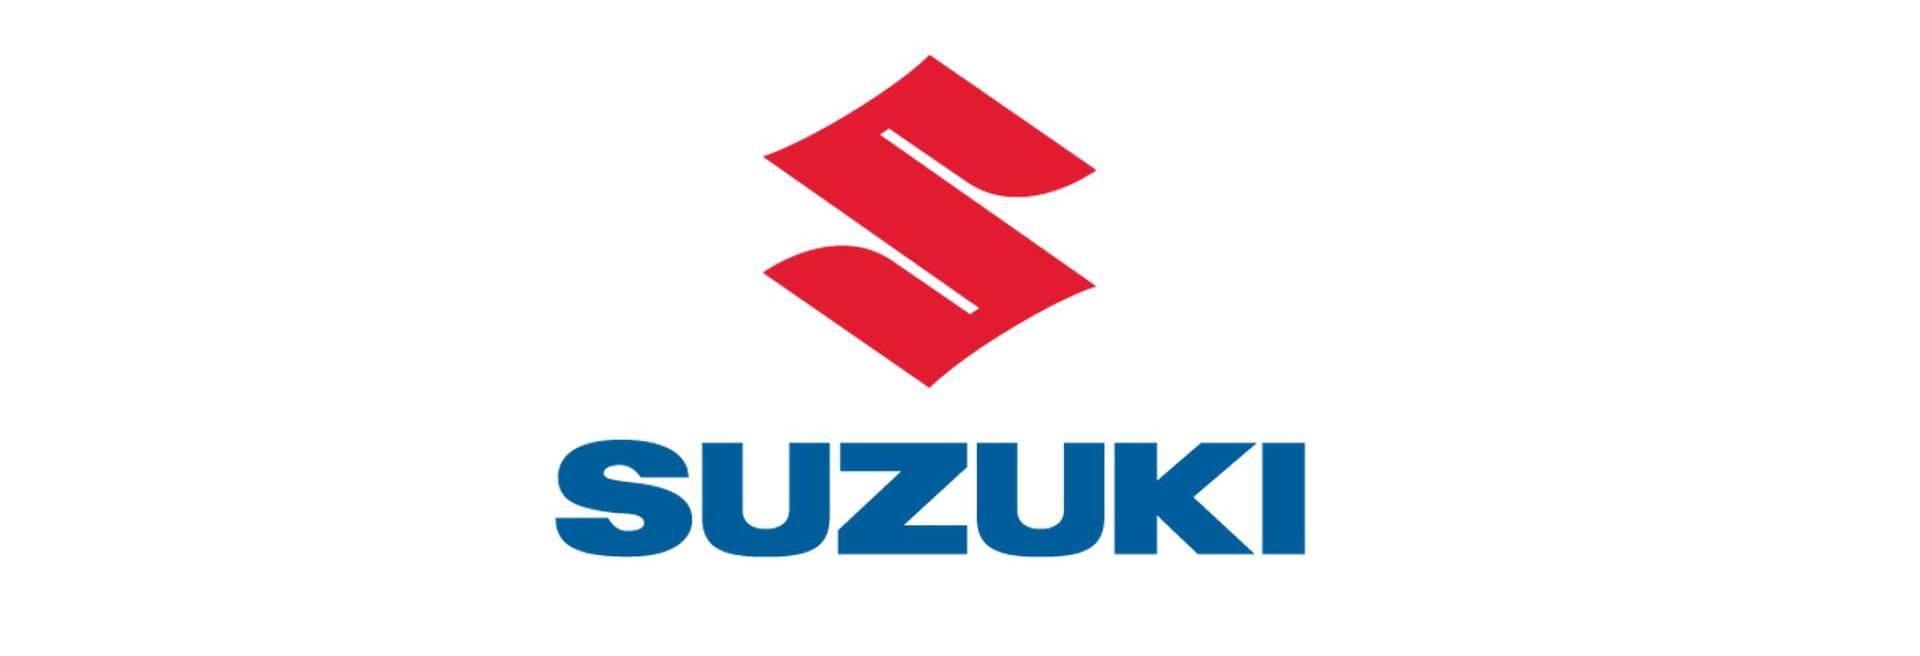 The success story of the Hungarian Suzuki has been written for 3 decades